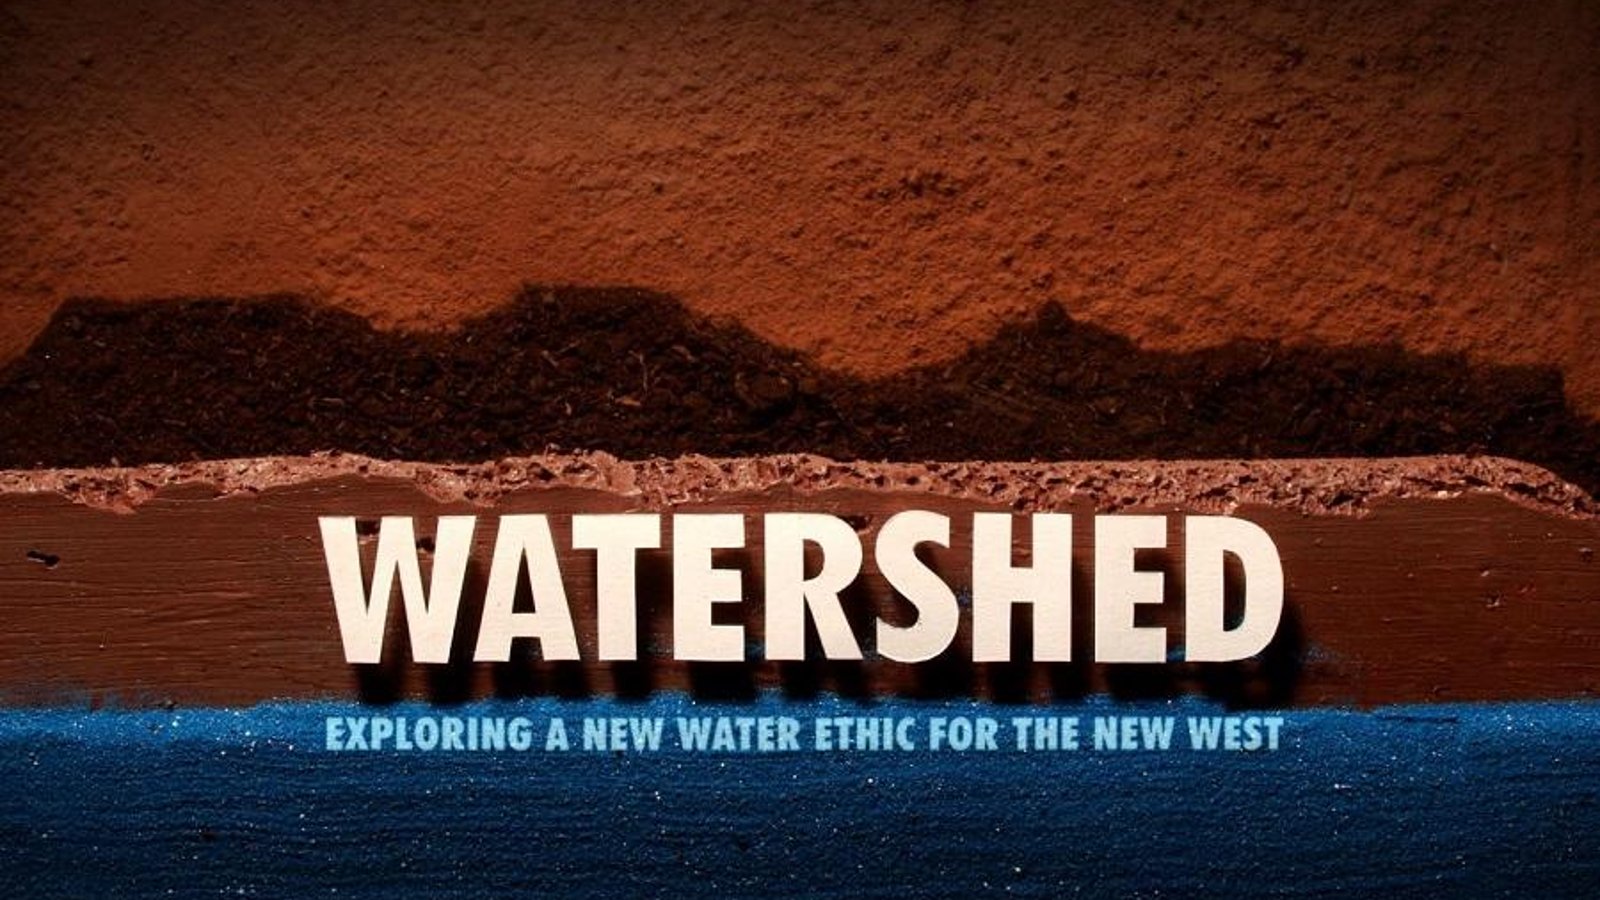 Watershed - Exploring a New Water Ethic for the New West